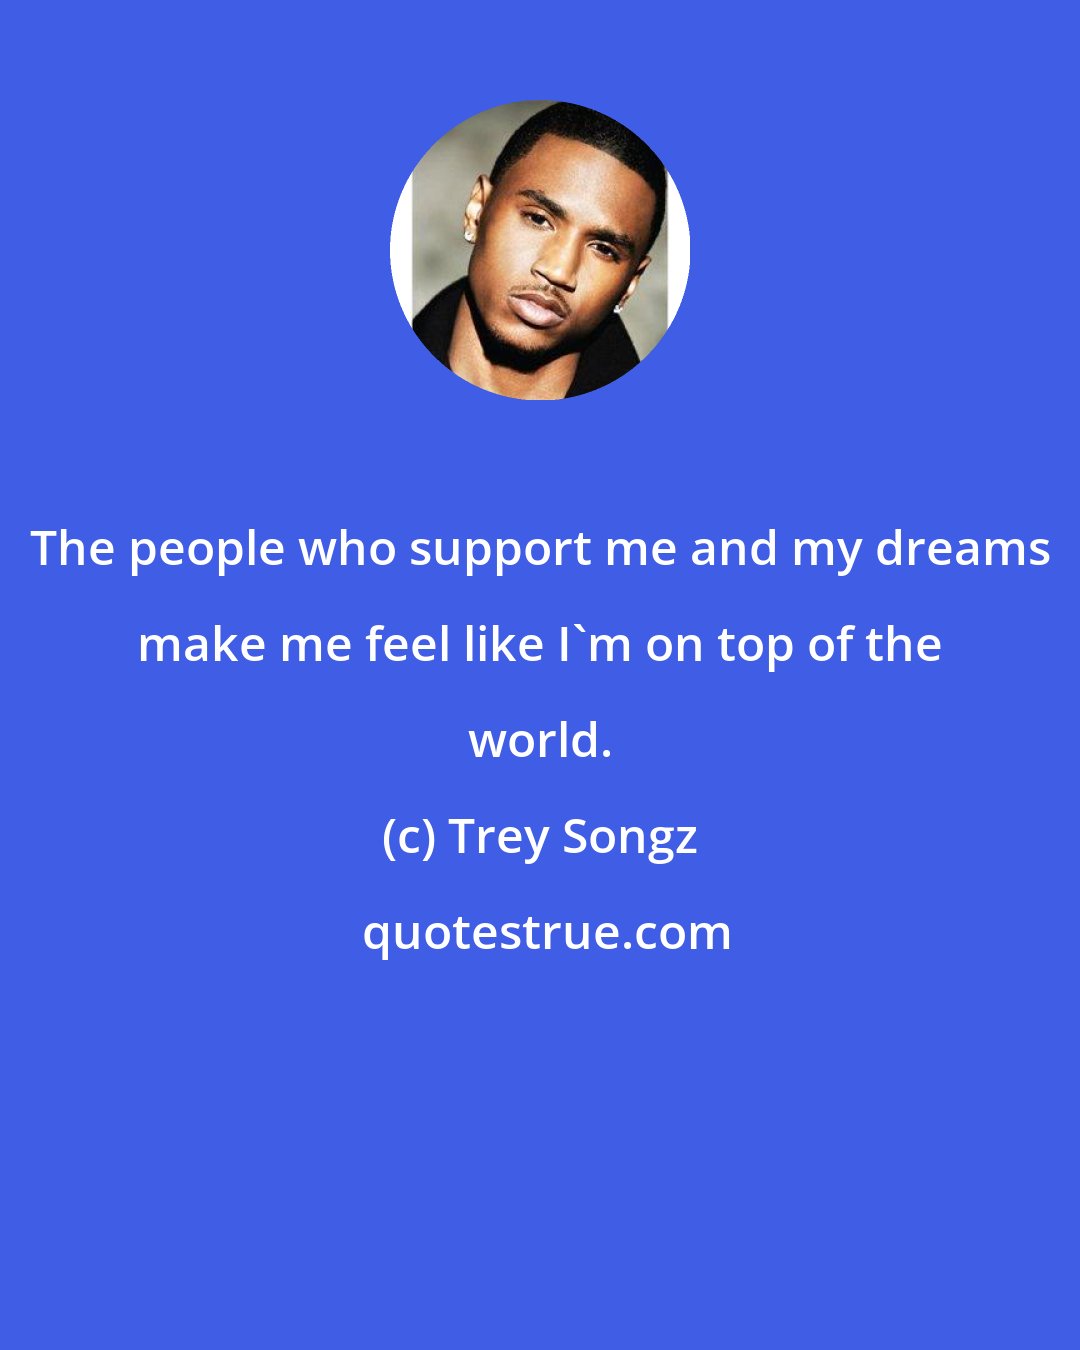 Trey Songz: The people who support me and my dreams make me feel like I'm on top of the world.